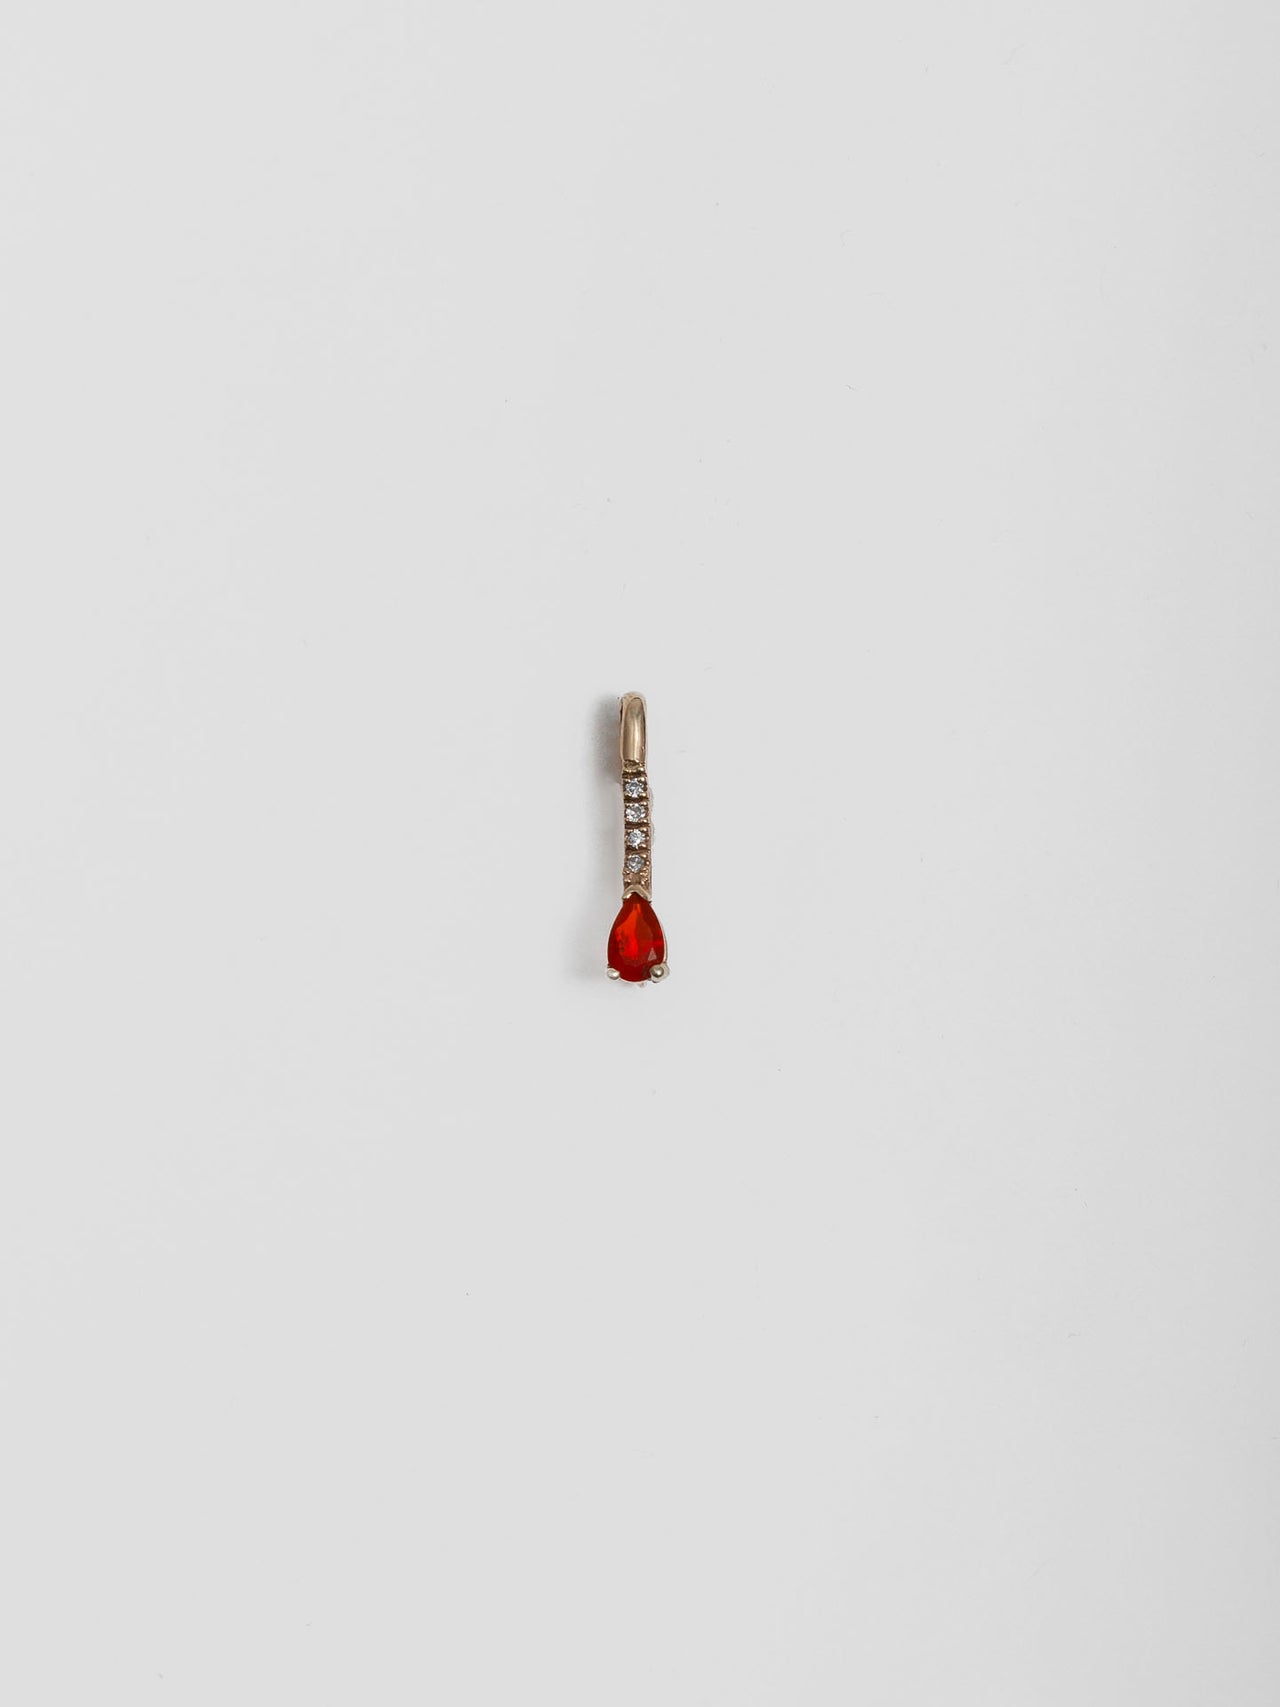 14kt Yellow Gold Mini Diamond Fire Opal Safety Pin pictured on light grey background. 